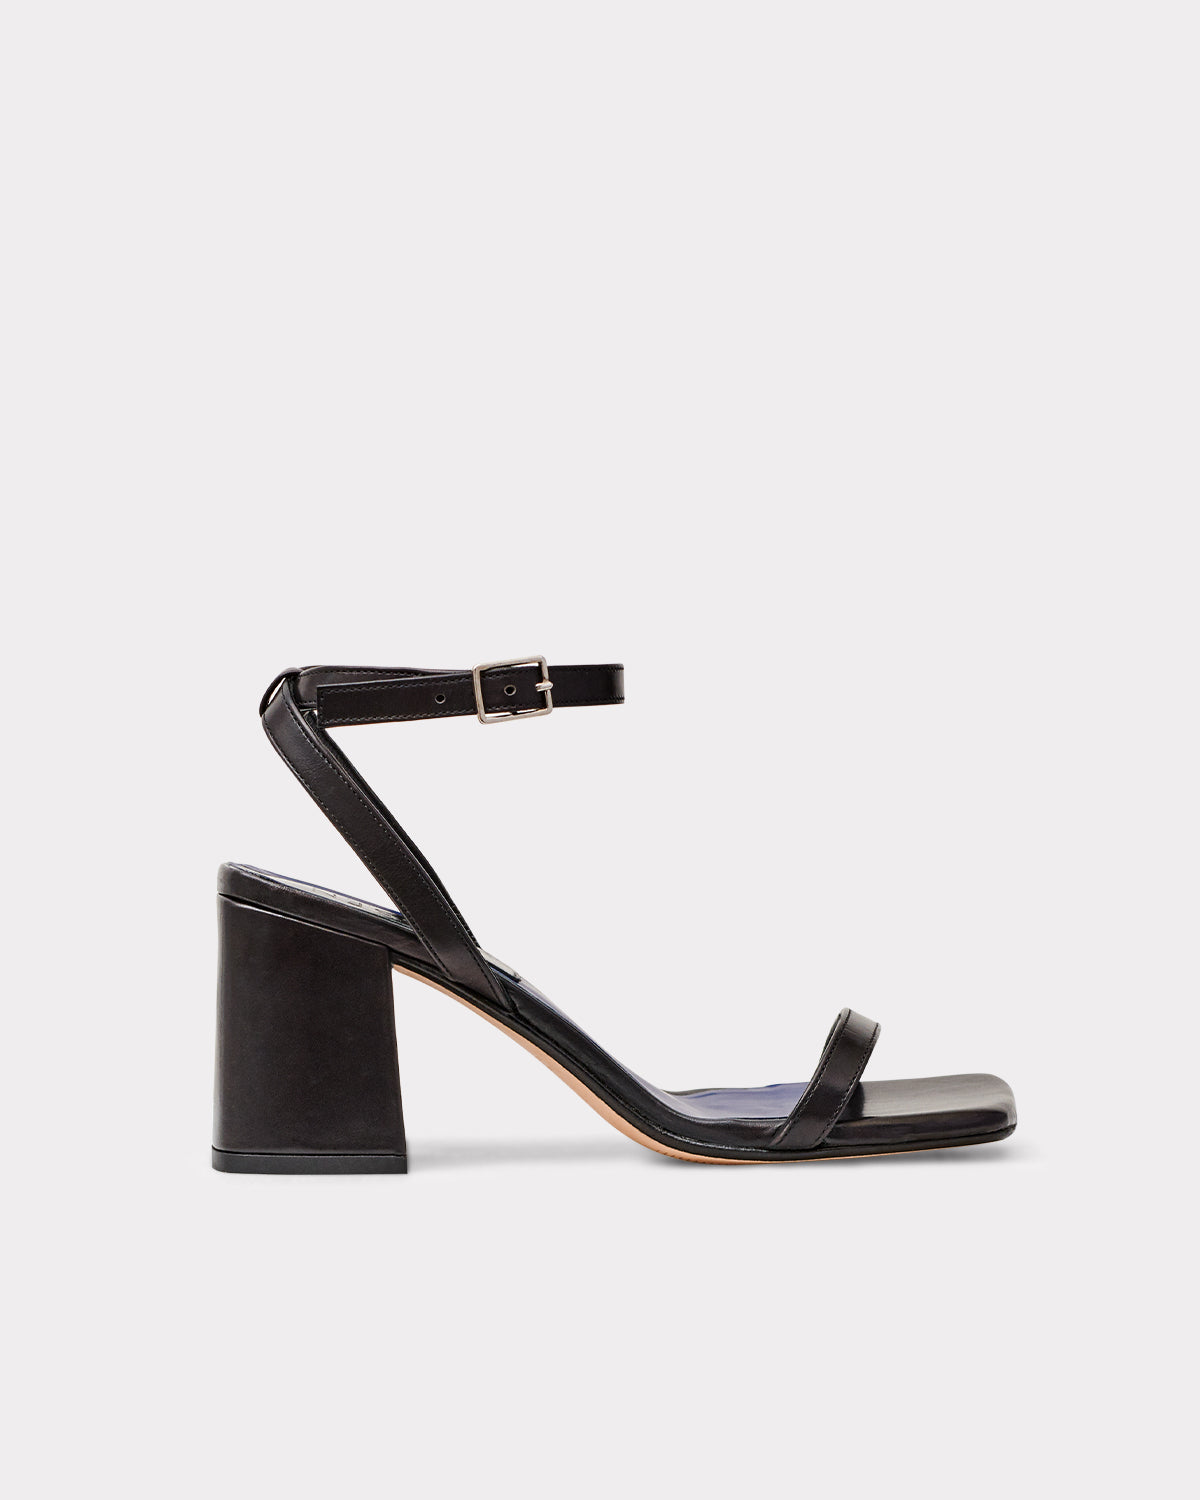 the row inspired black strappy sandals with block heel